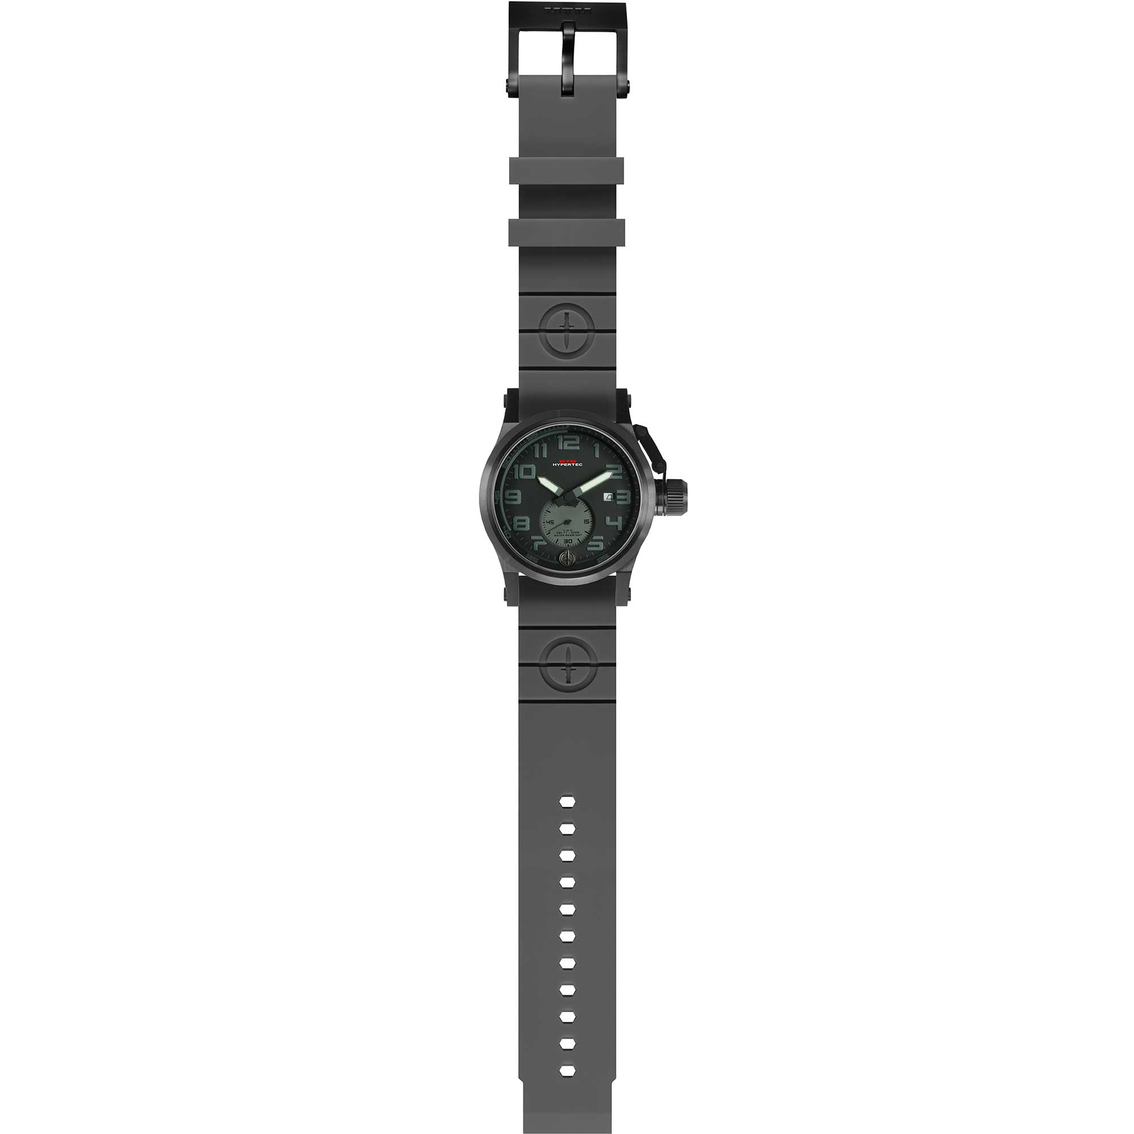 MTM Special Ops Hypertec Chrono 1A 44mm Gray Rubber II Band Watch HC1ABGRYGYR2MTM - Image 2 of 2